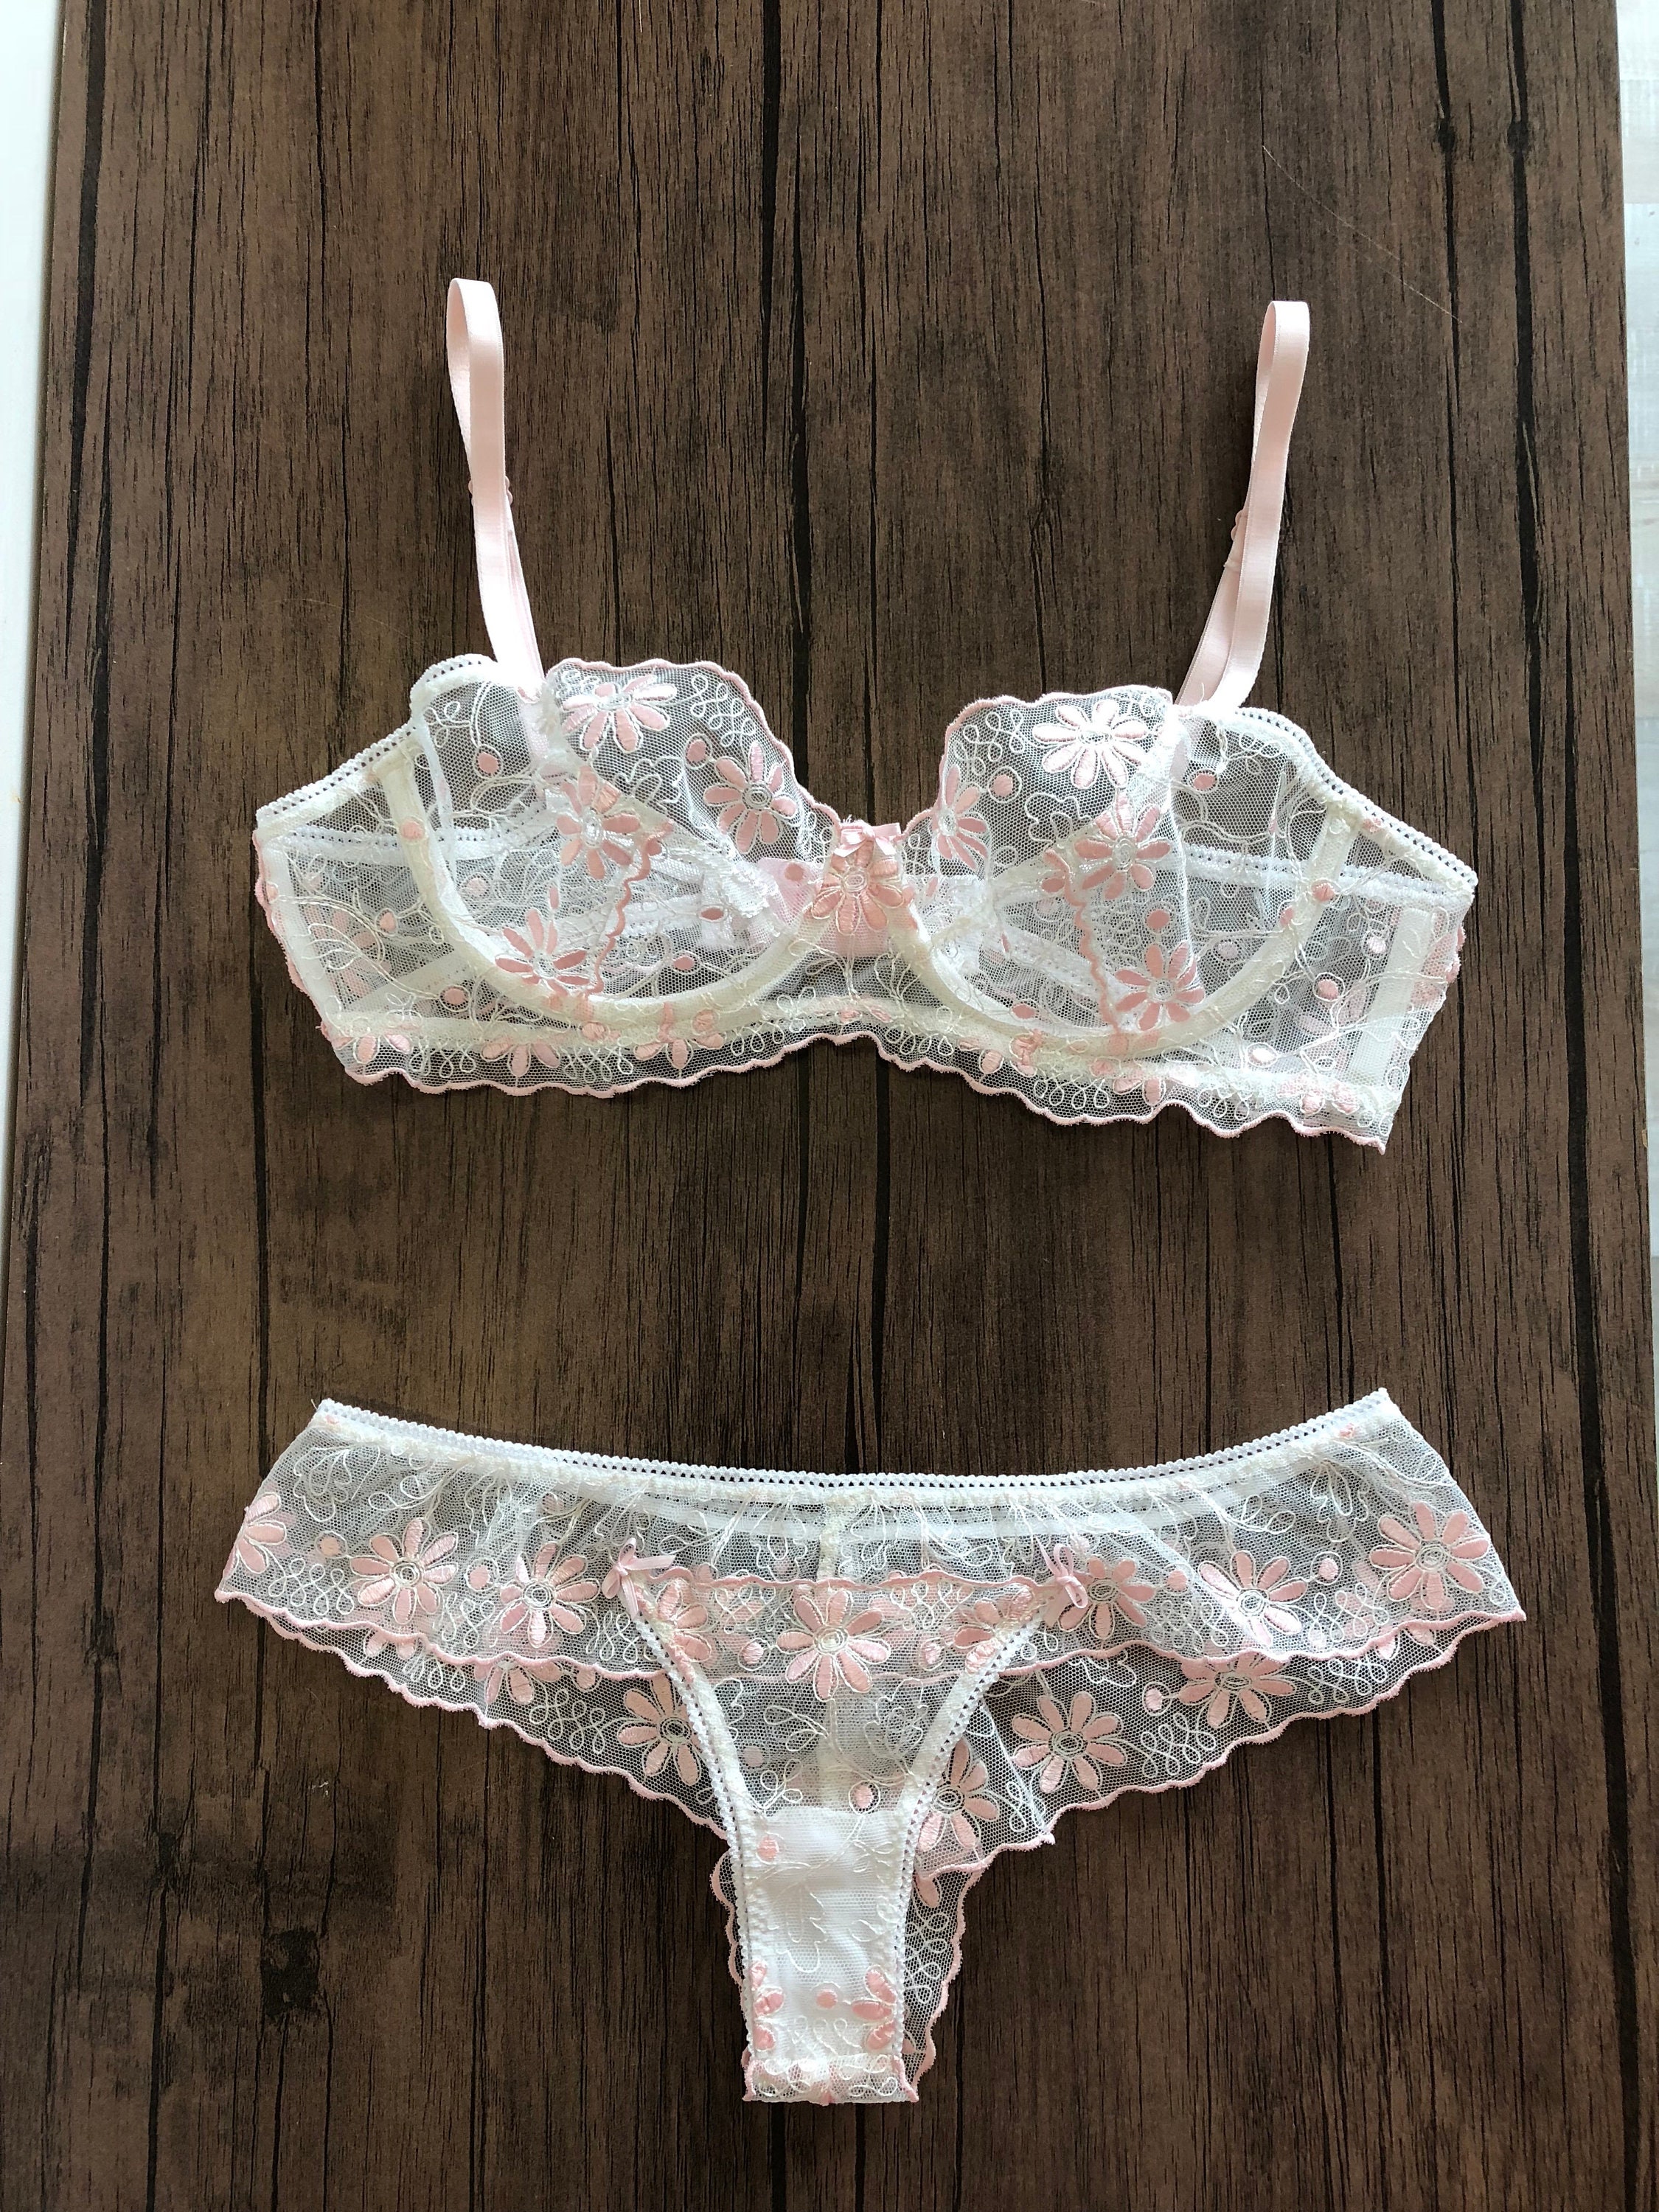 Lingerie Set See Through Lingerie Sexy Lingerie See Through Etsy